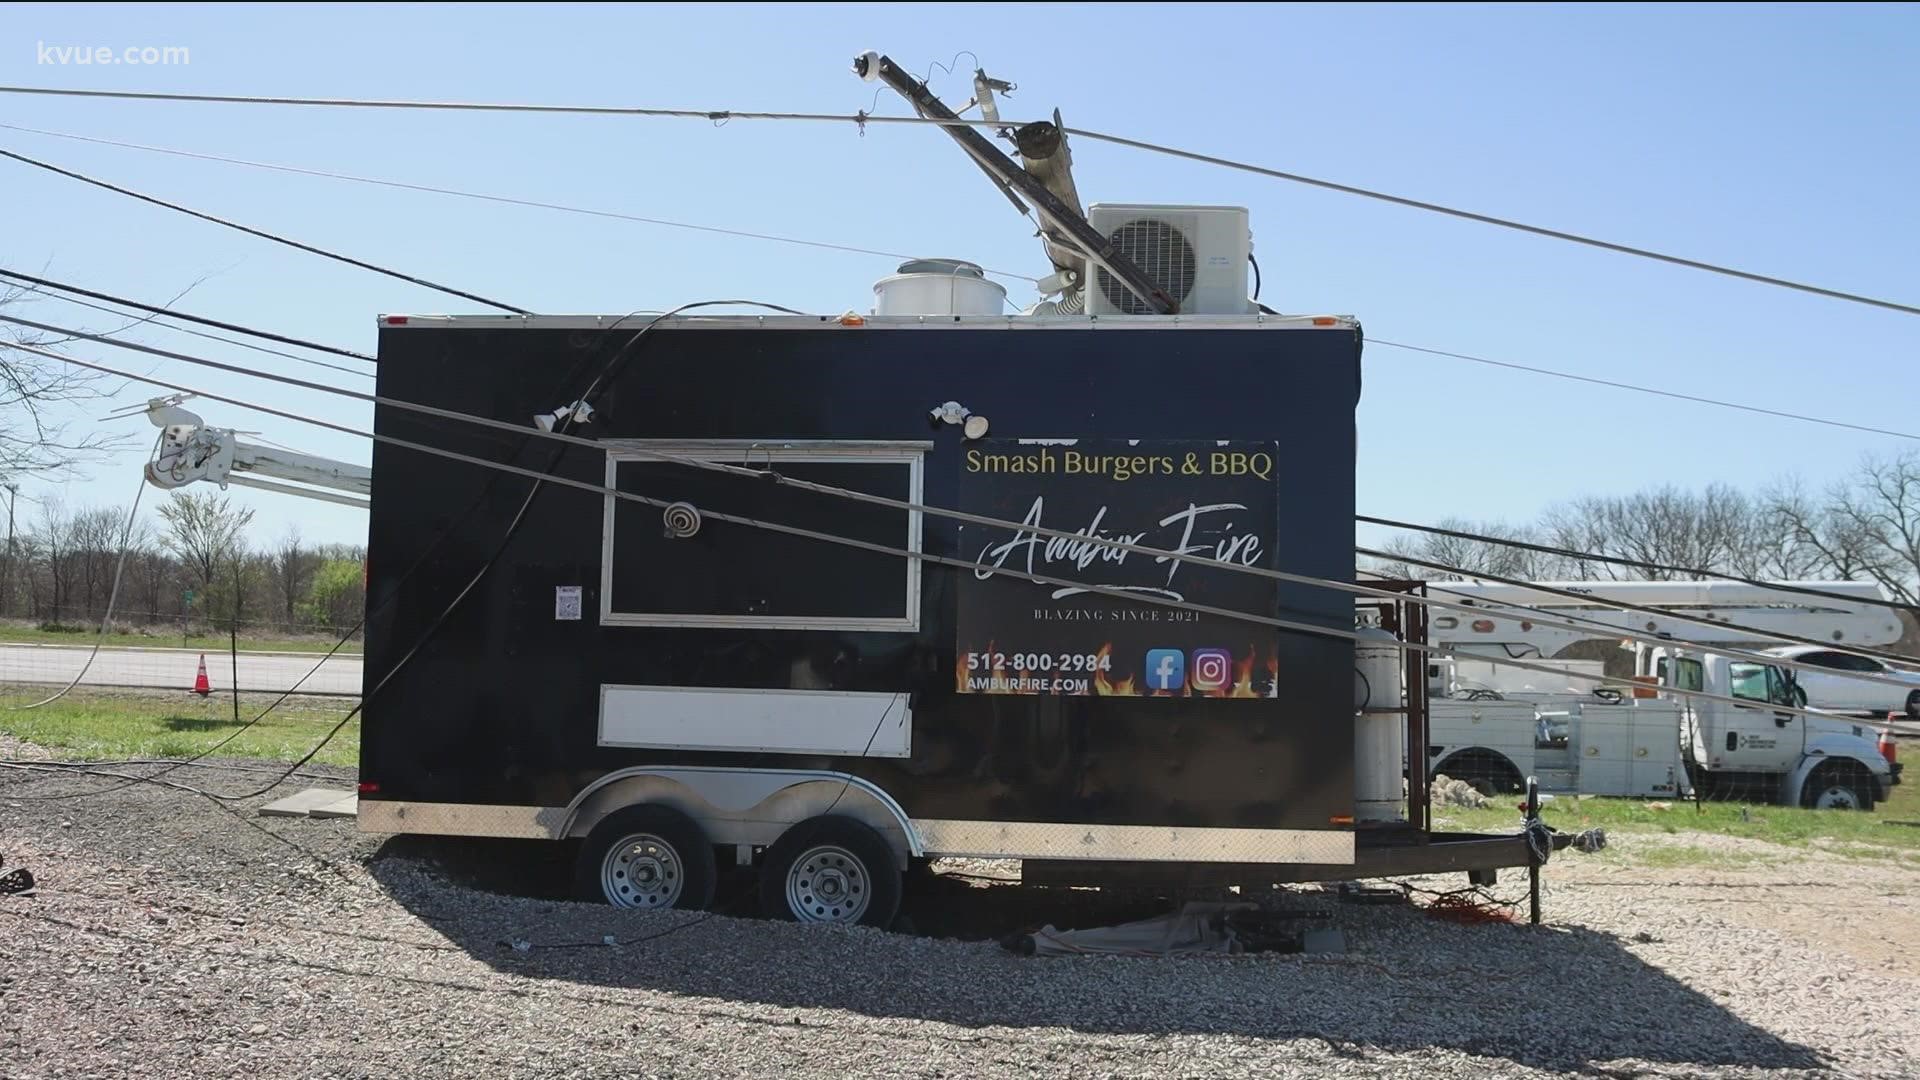 The Amburgeys had their food truck totaled. While their truck is getting fixed, the crew rebuilding it let them borrow a trailer to restart their business.